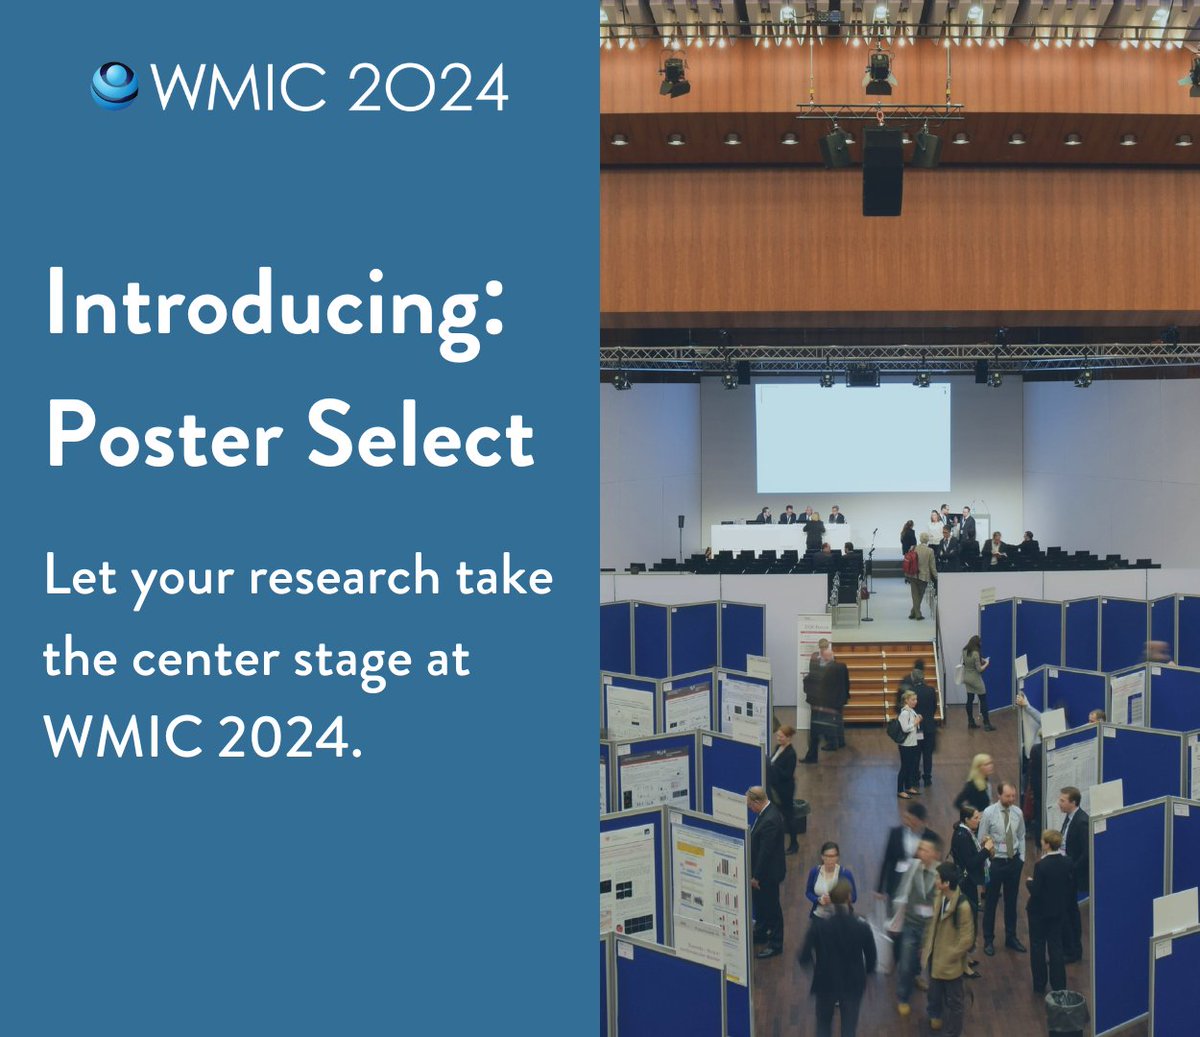 Poster Select at #WMIC2024 offers an exciting opportunity for poster presenters to deliver concise, high-impact 1-2 minute spotlight talks at the start of each poster session. Submit your abstract now, wmis.org/abstract-guide…, for a chance to showcase your work globally!